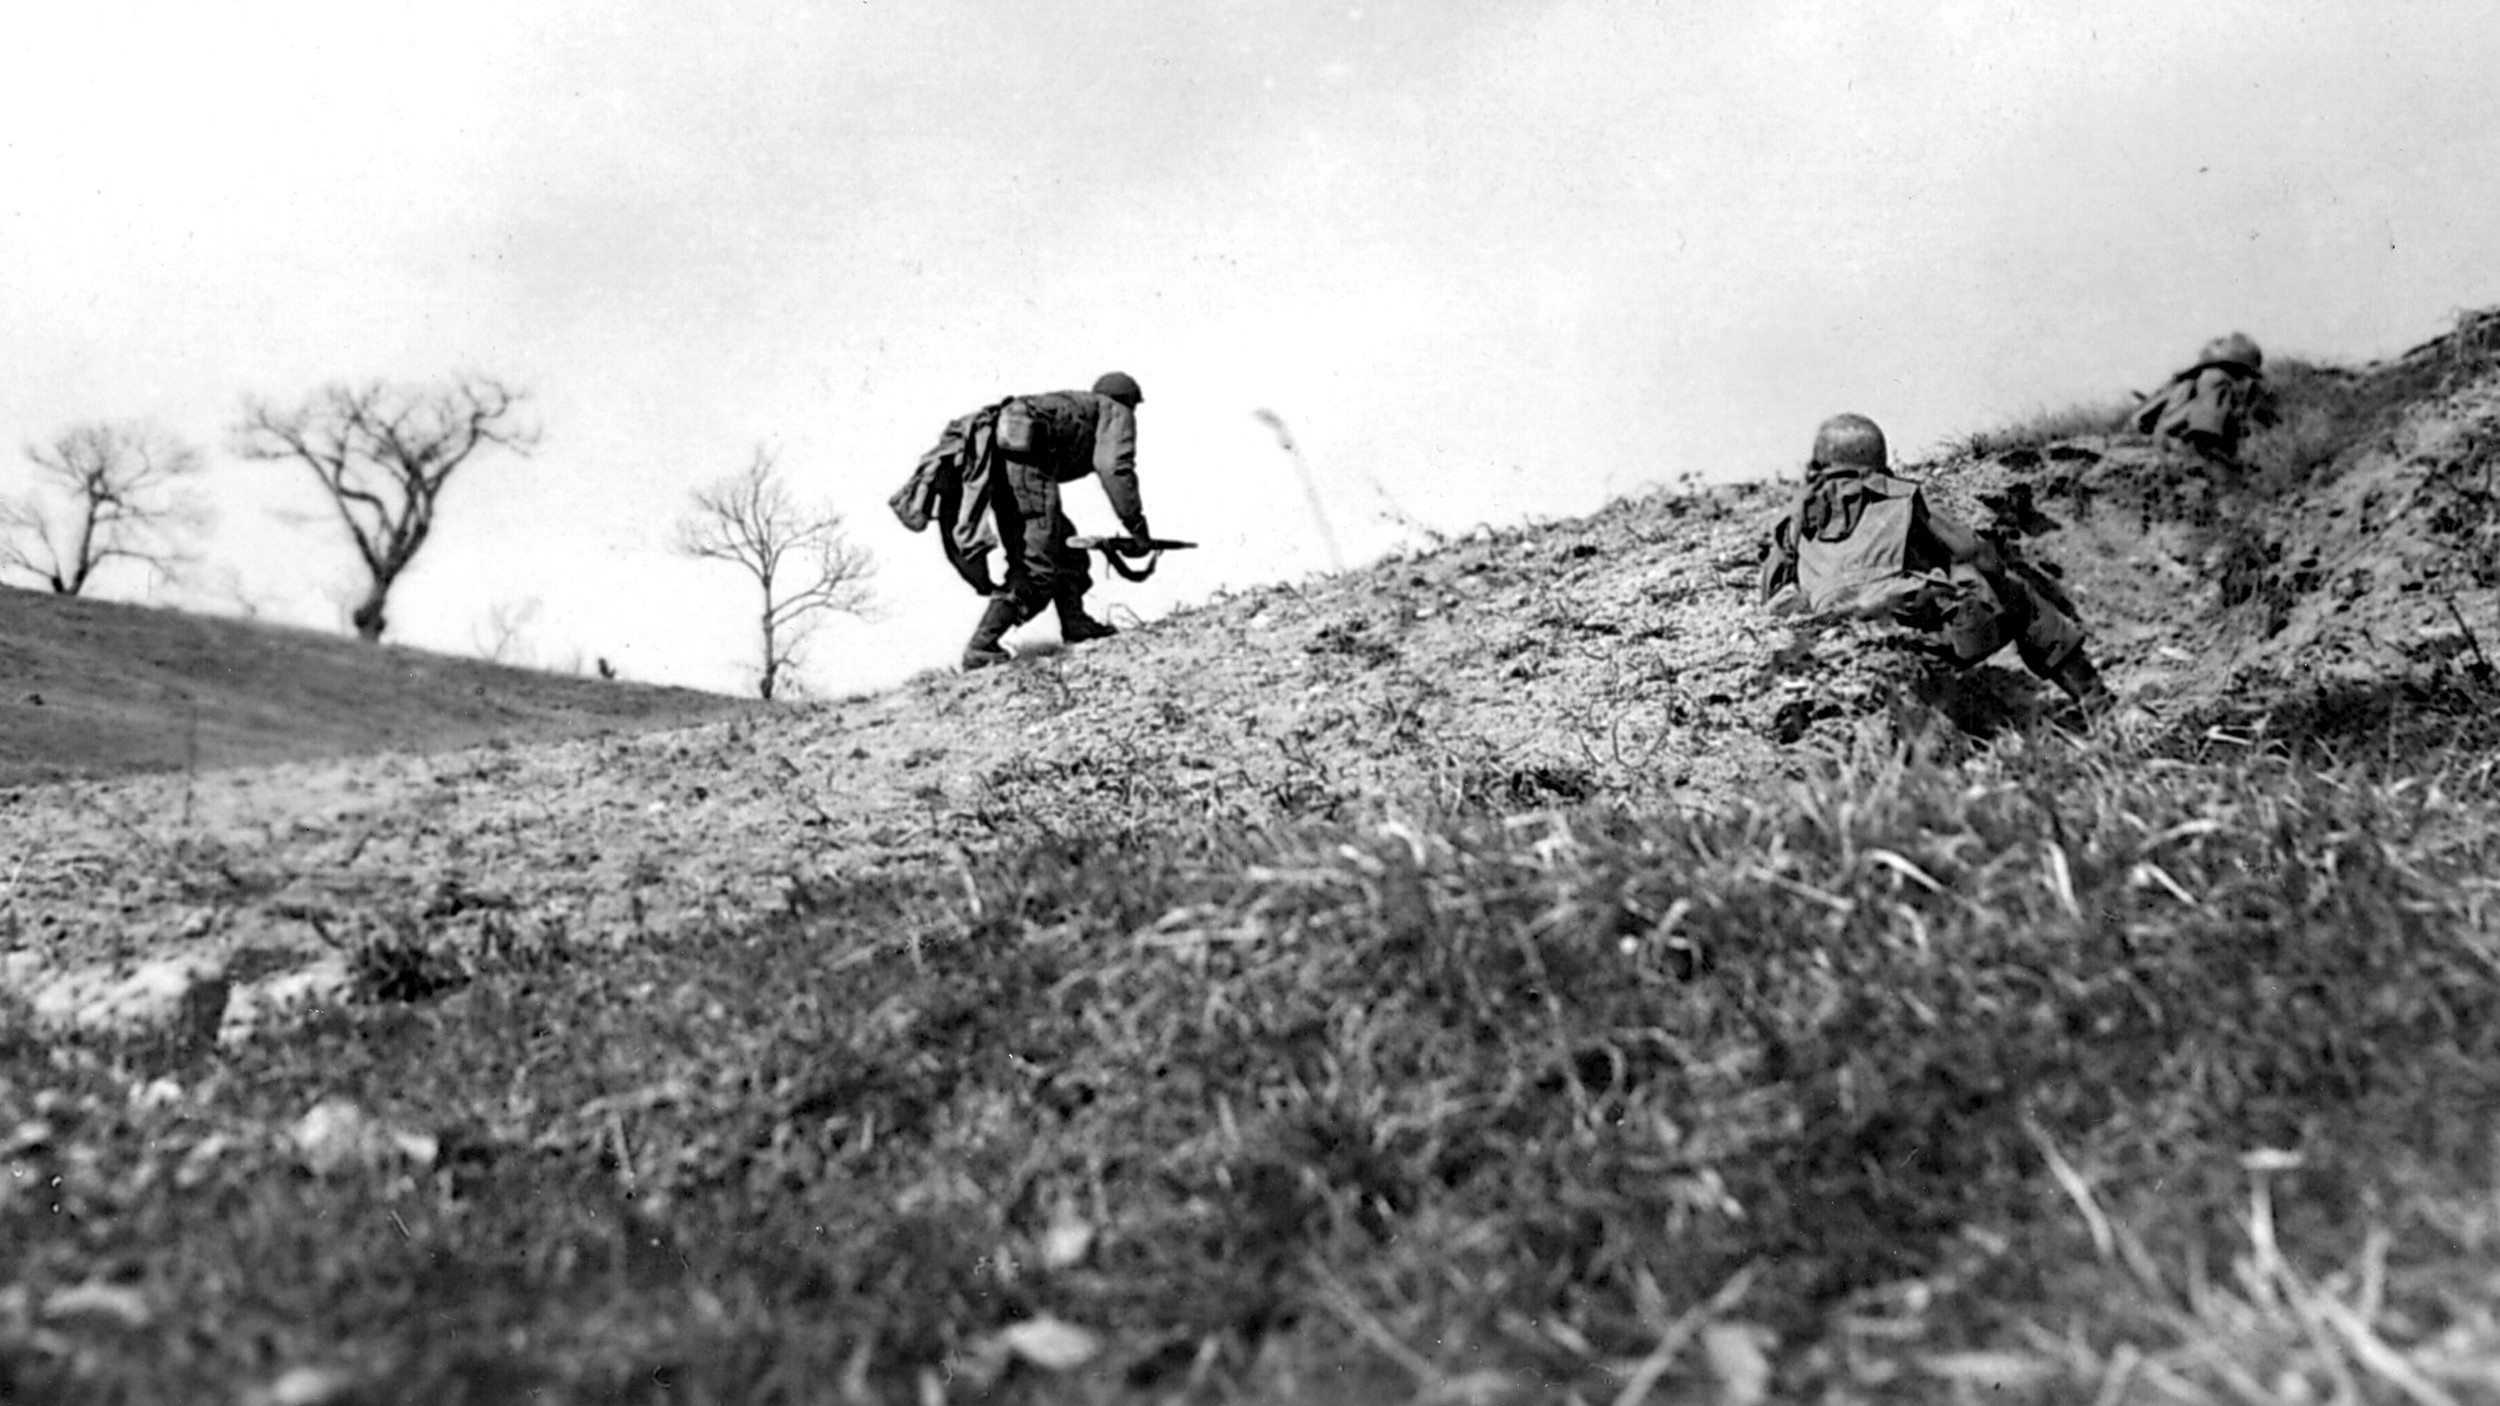 On March 4, 1945, soldiers of the 10th Mountain Division advance cautiously toward German positions at Sassomglare, Italy. The ranks of the 10th Mountain included some of the finest skiers in the world, but the troops also fought as regular infantry.